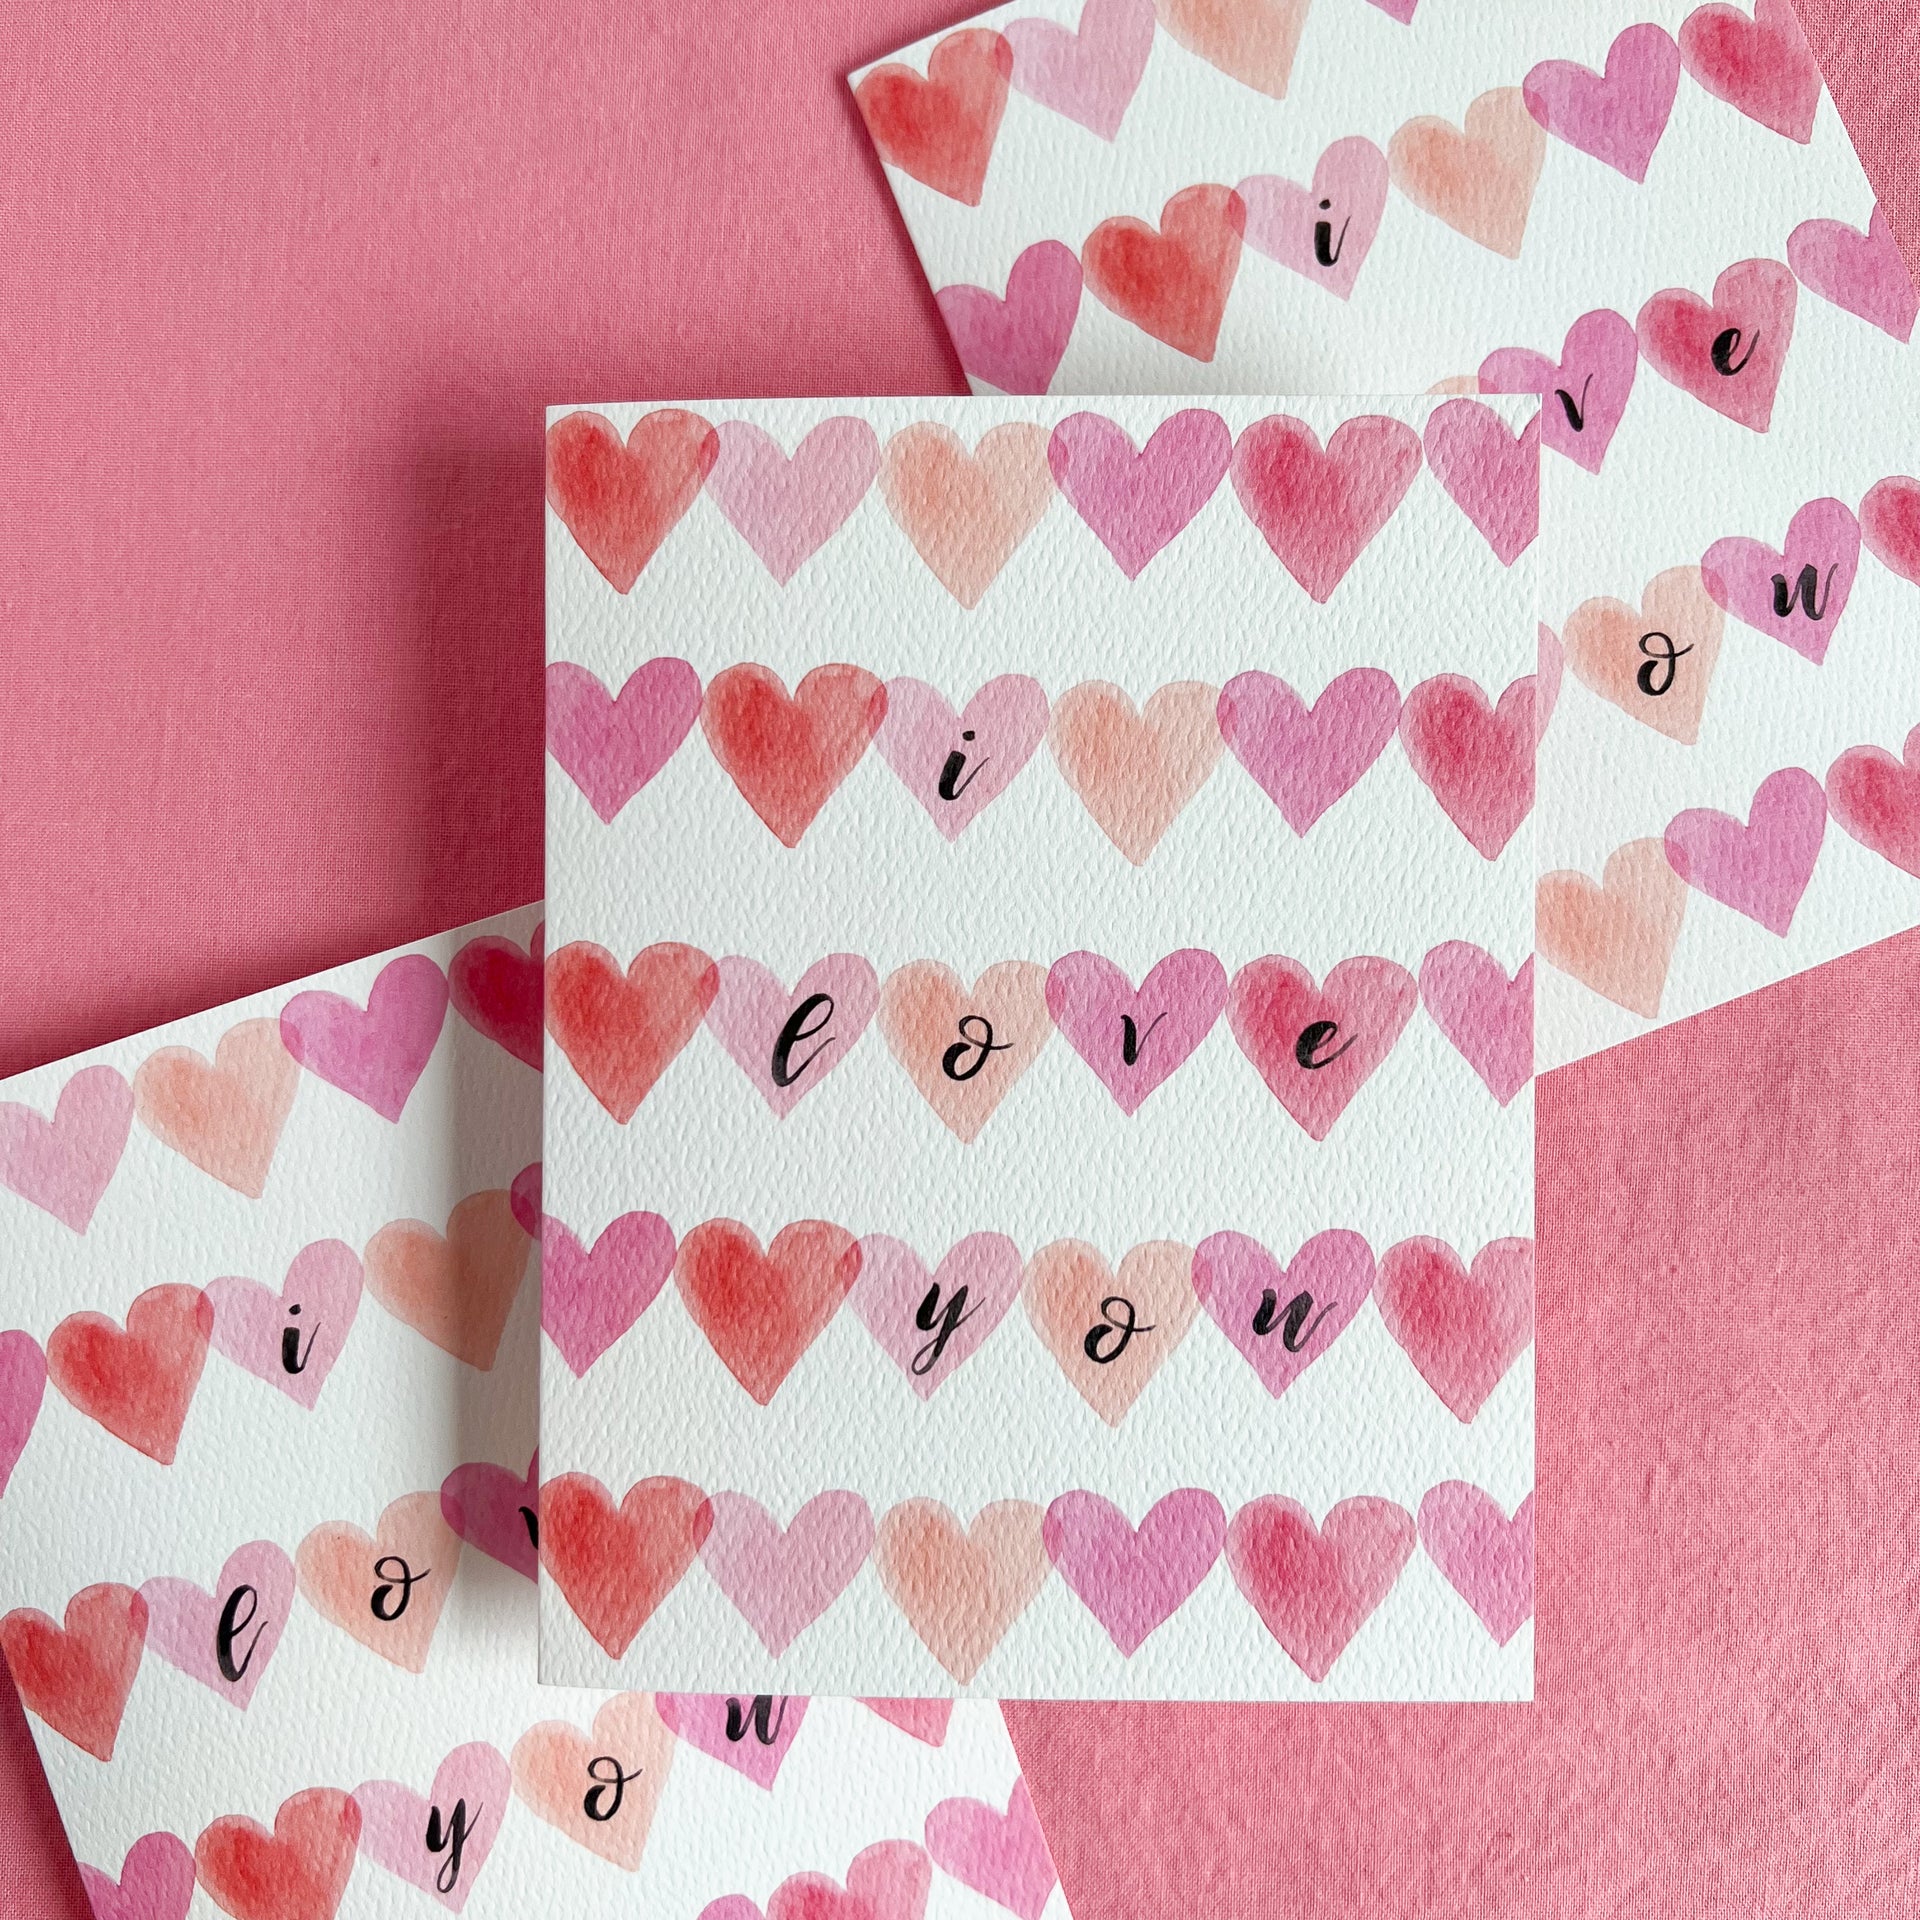 I Love You Watercolor Hearts Greeting Card by gert & Co